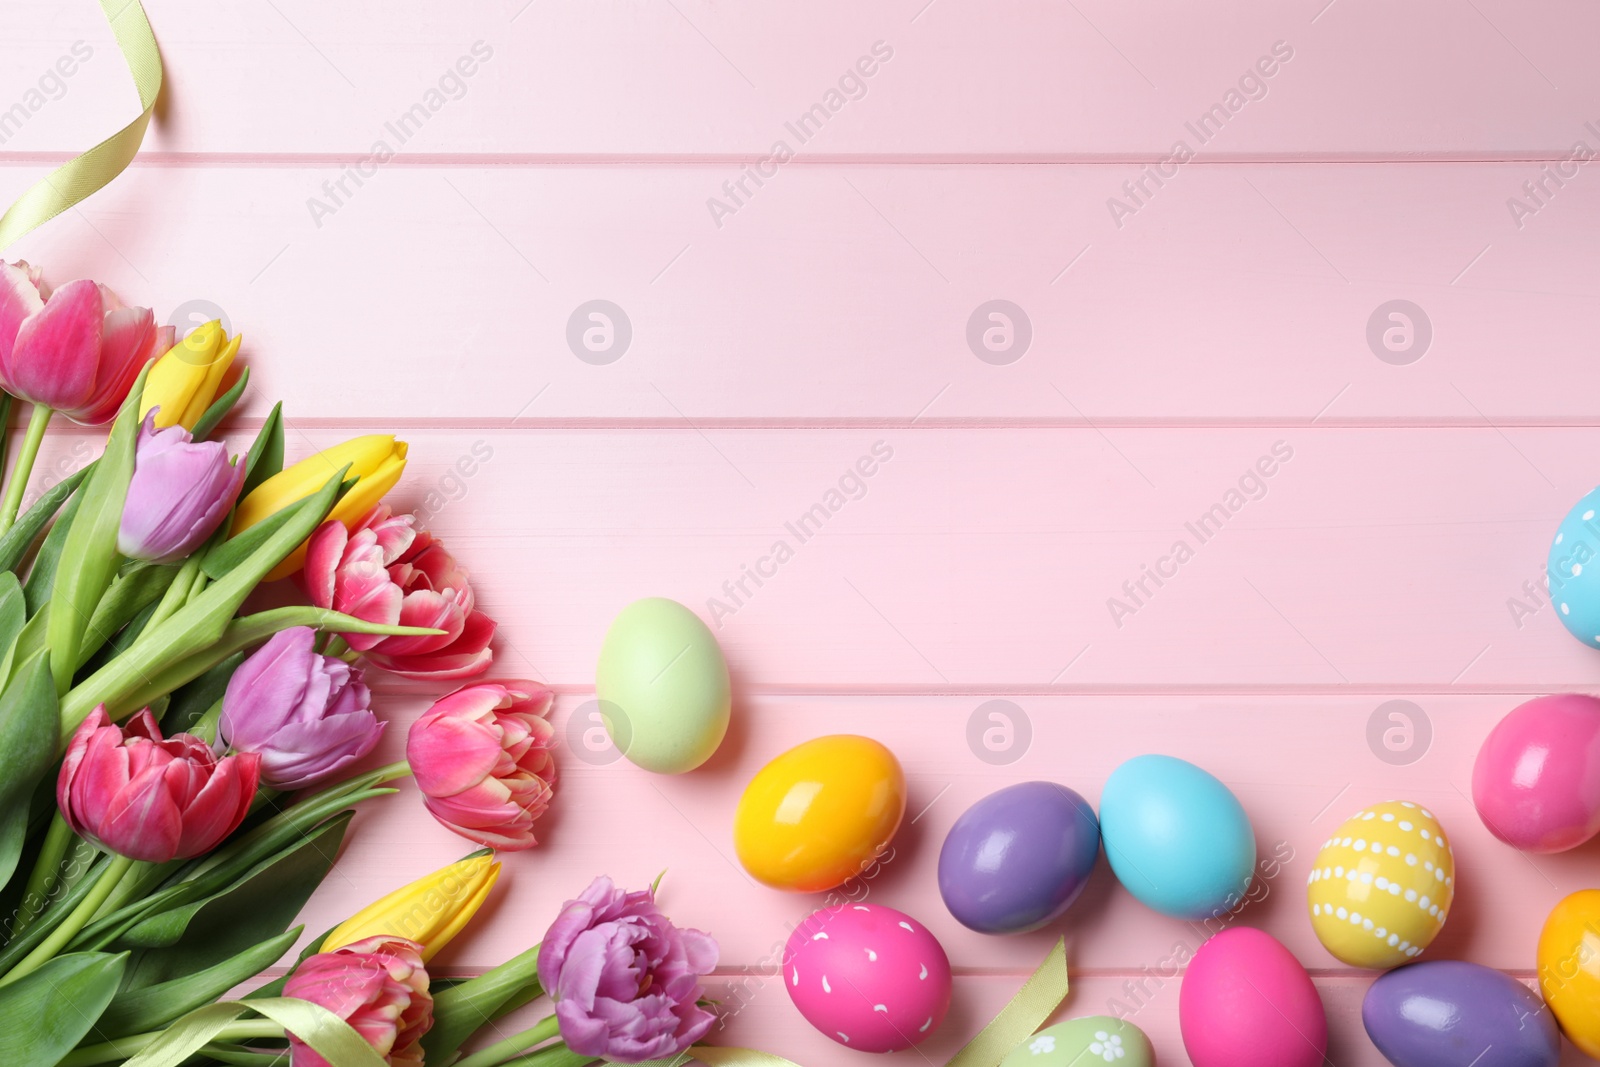 Photo of Bright painted eggs and spring tulips on pink wooden table, flat lay with space for text. Happy Easter